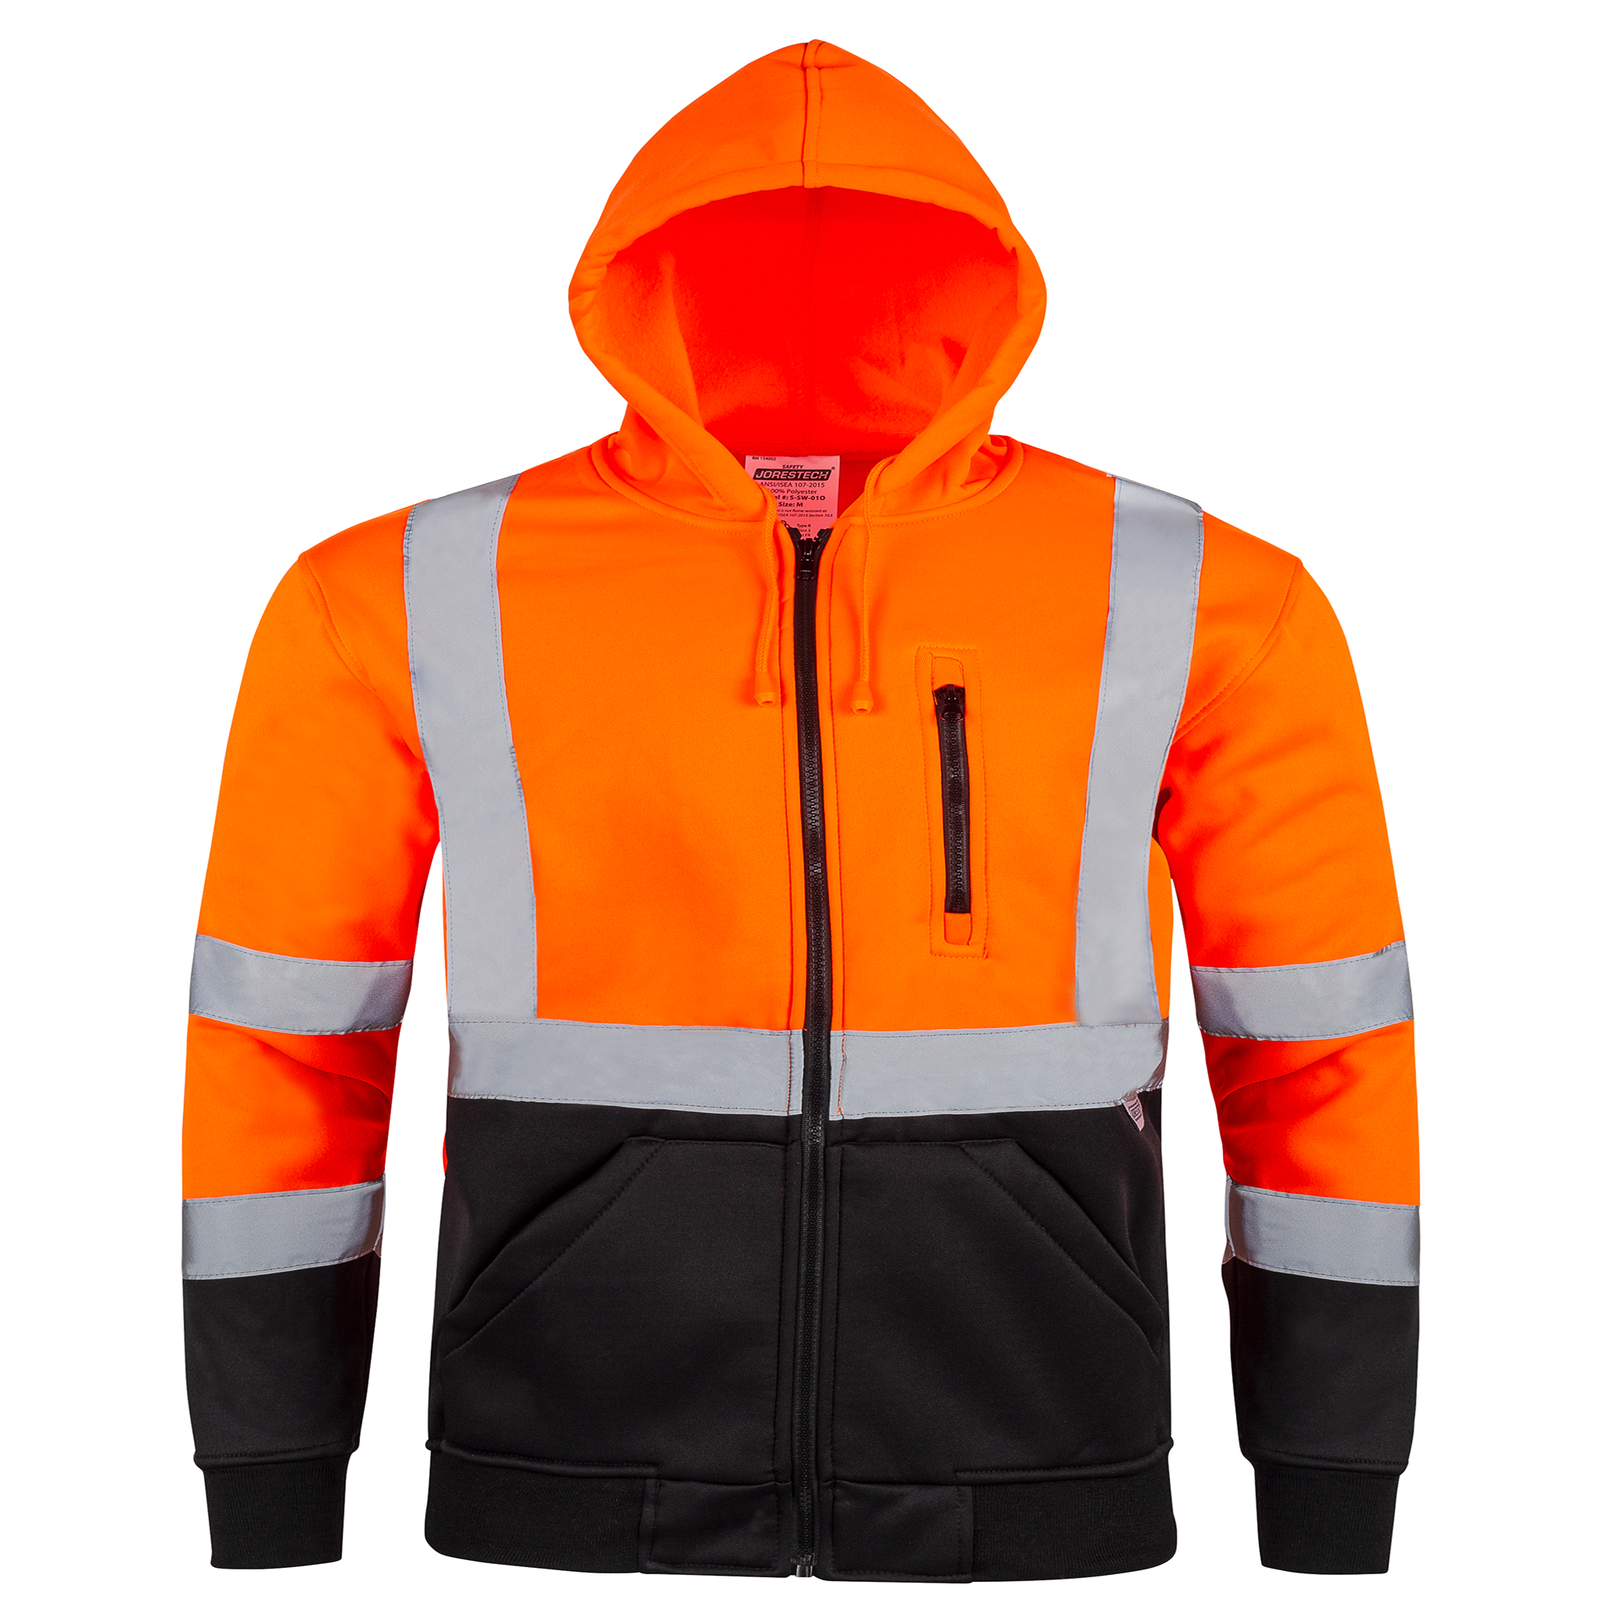 Fron view of the JORESTECH hi-vis safety hooded orange and black sweatshirt with reflective stripes.